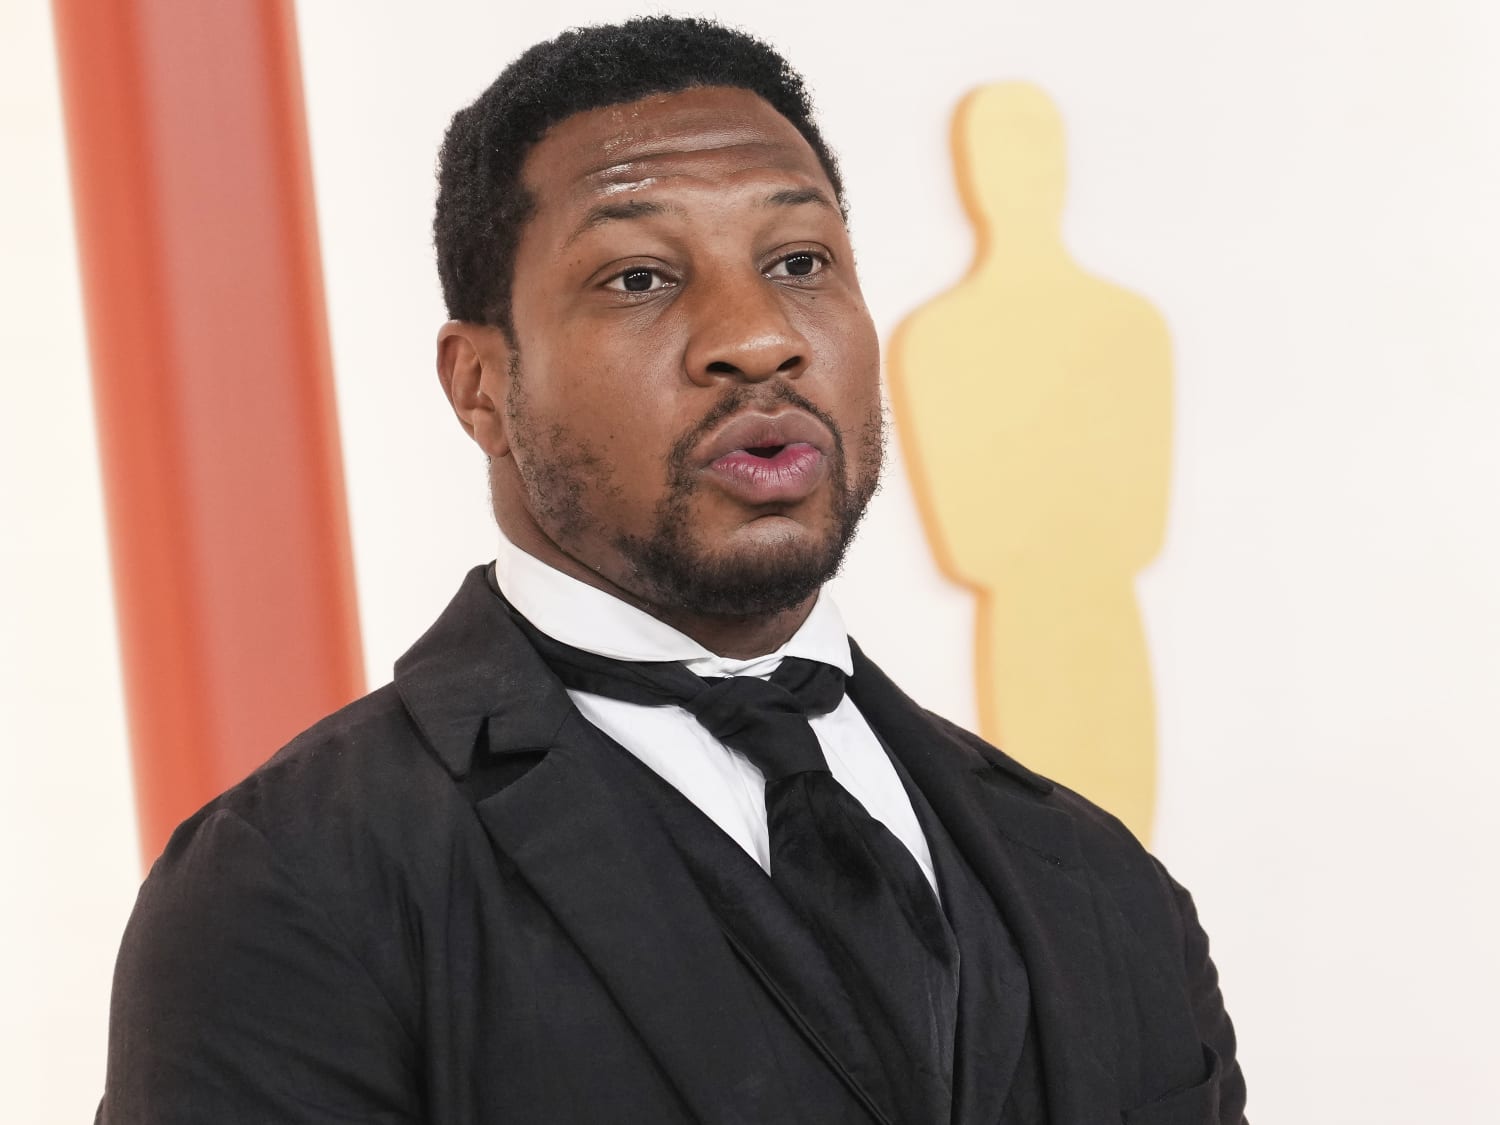 Actor Jonathan Majors arrested in alleged violent domestic dispute